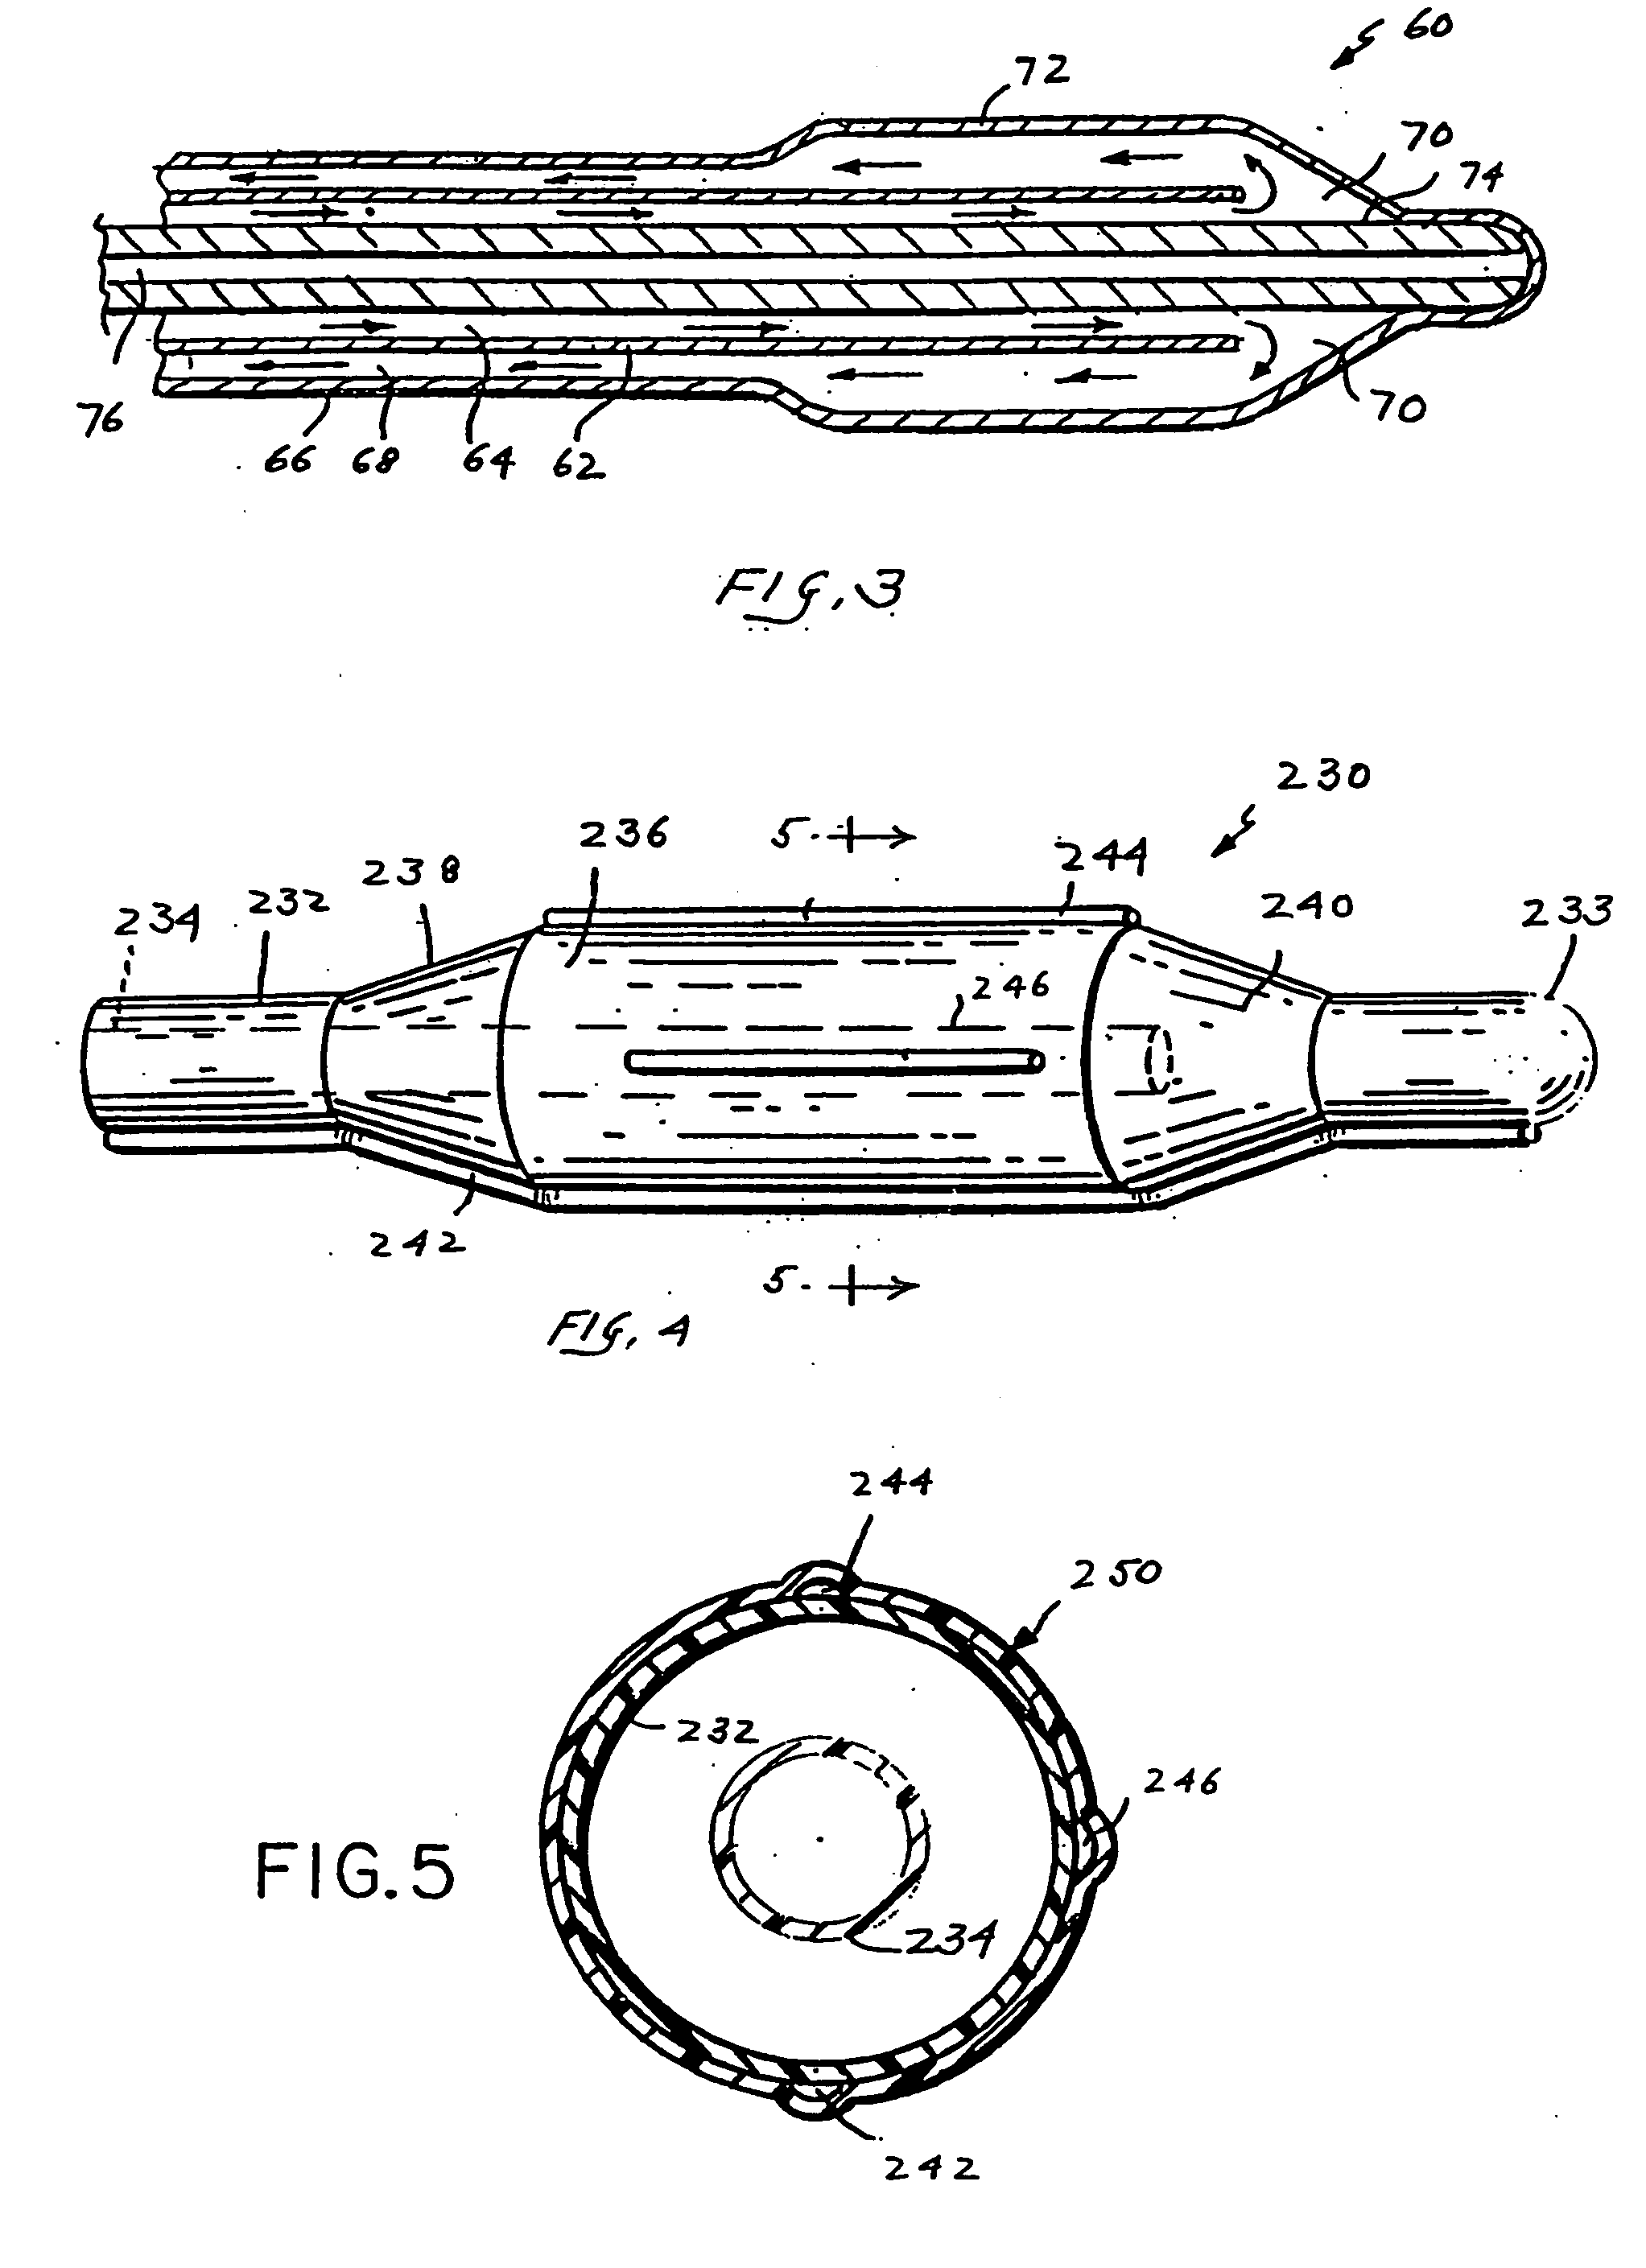 Heat transfer catheters and methods of making and using same